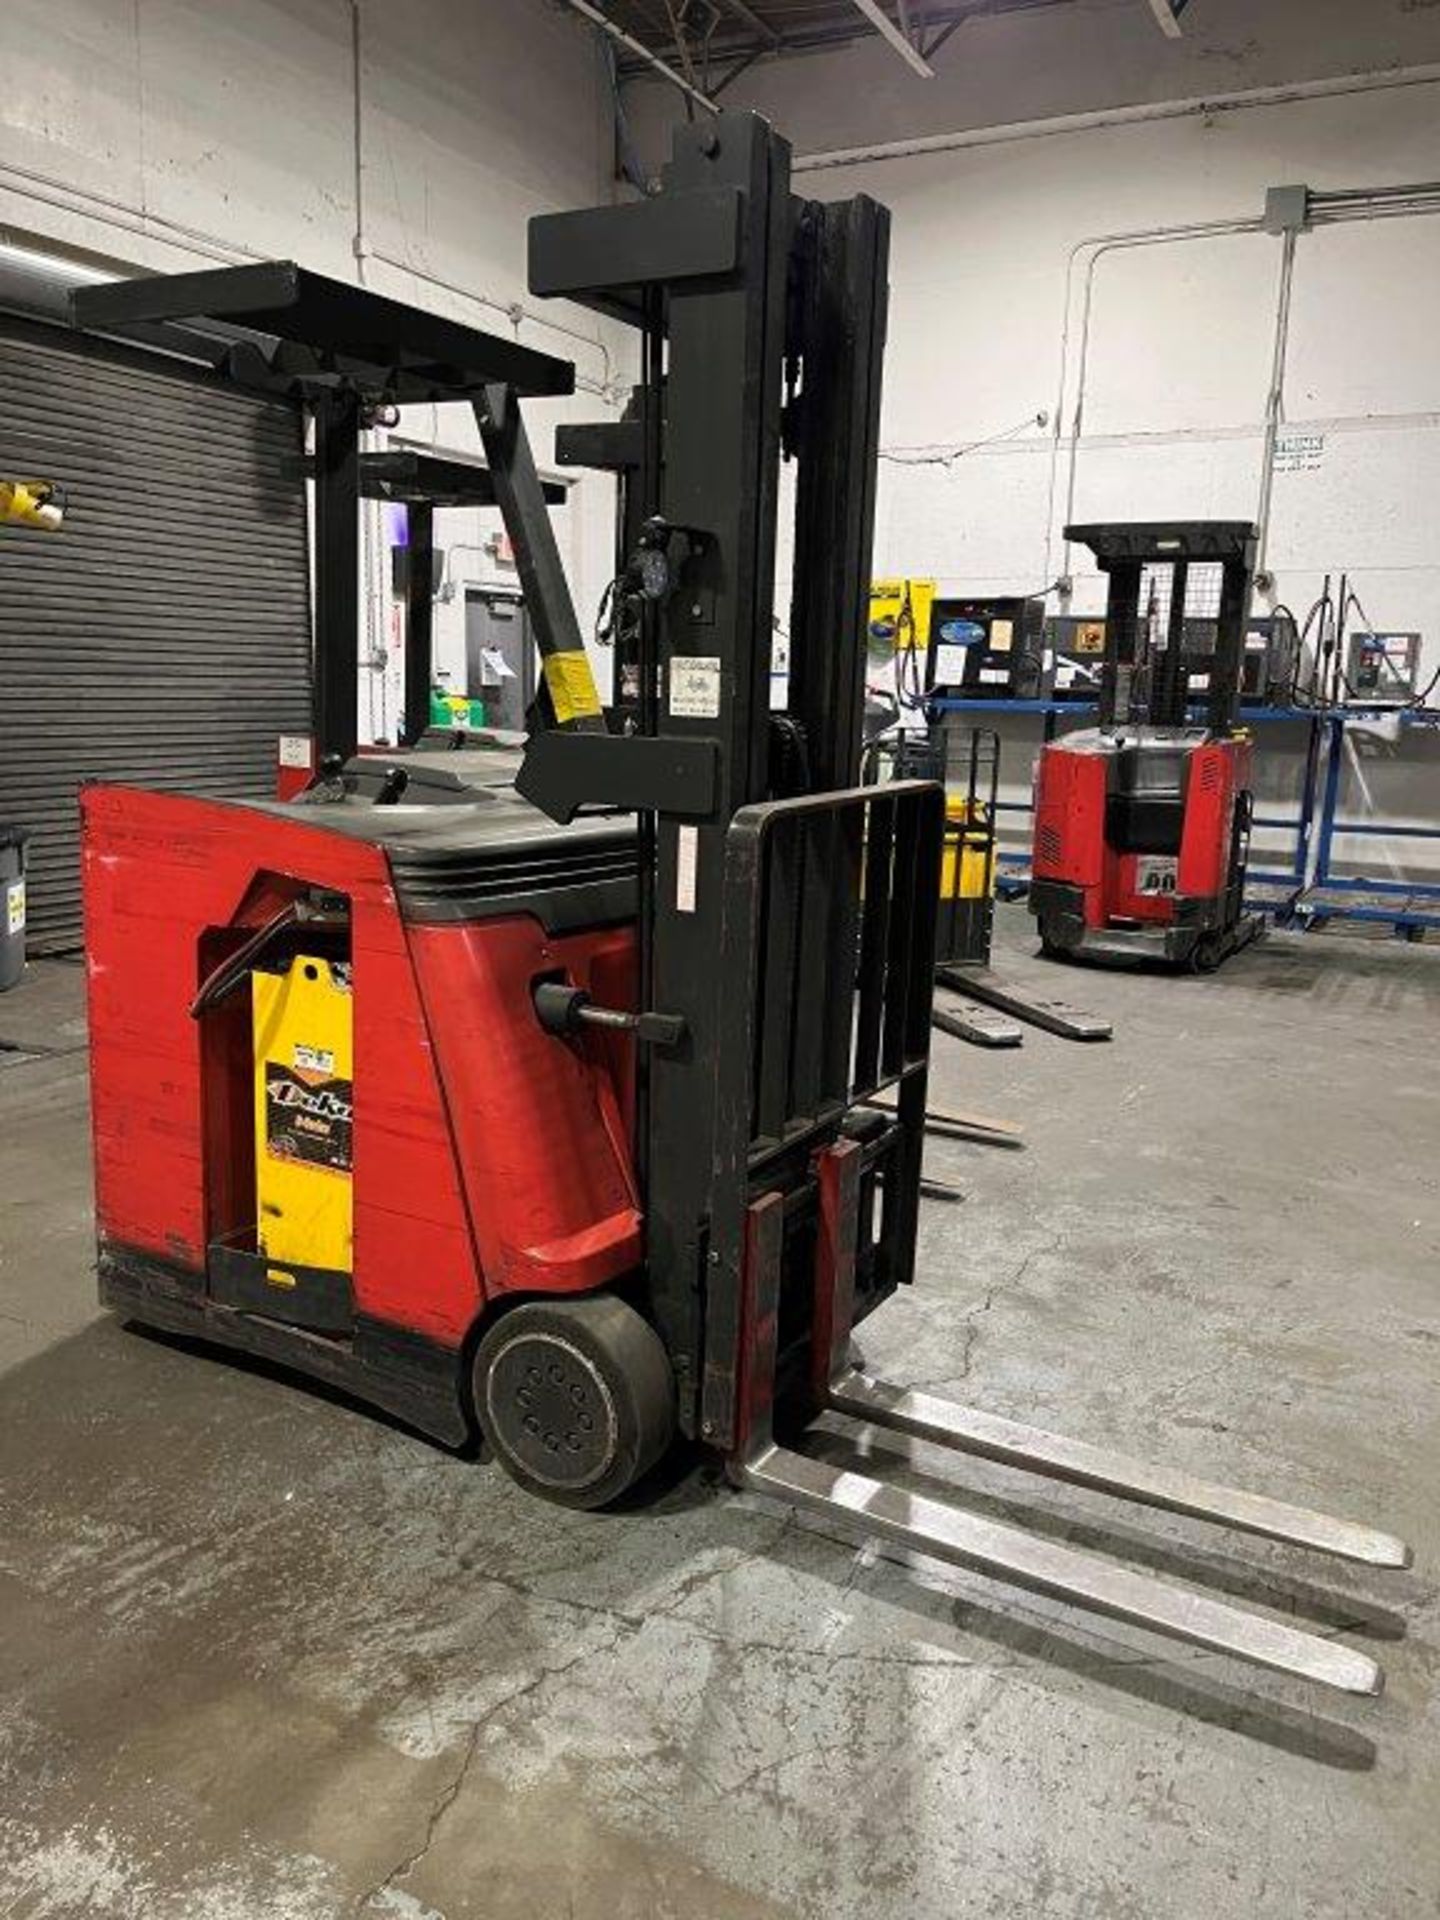 Raymond DSS300 3,000-Lb Capacity Standup Electric Forklift - Image 2 of 5